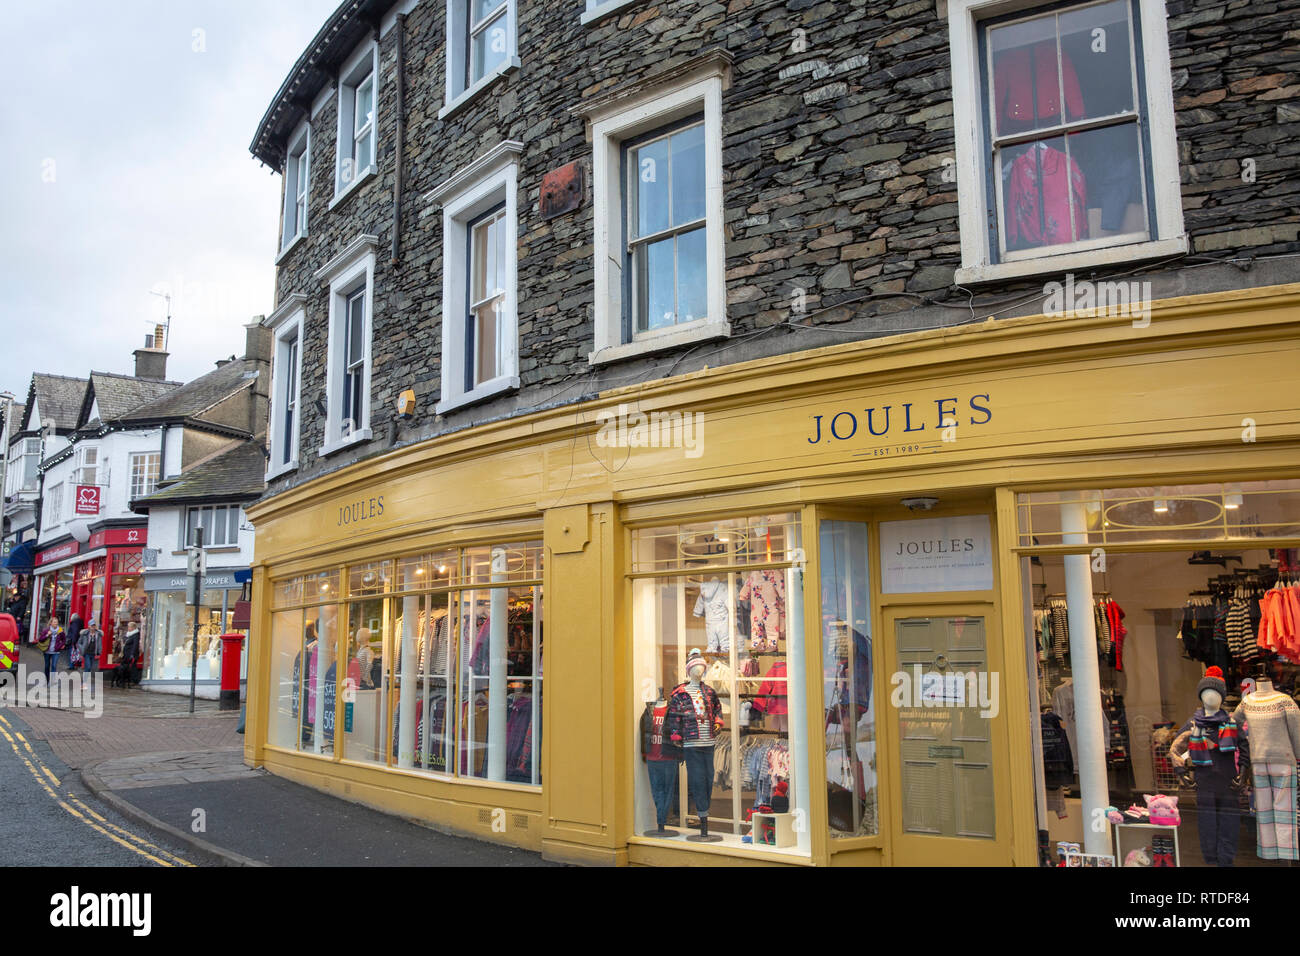 Joules clothing store in Bowness on windermere,Lake District,Cumbria,England Stock Photo